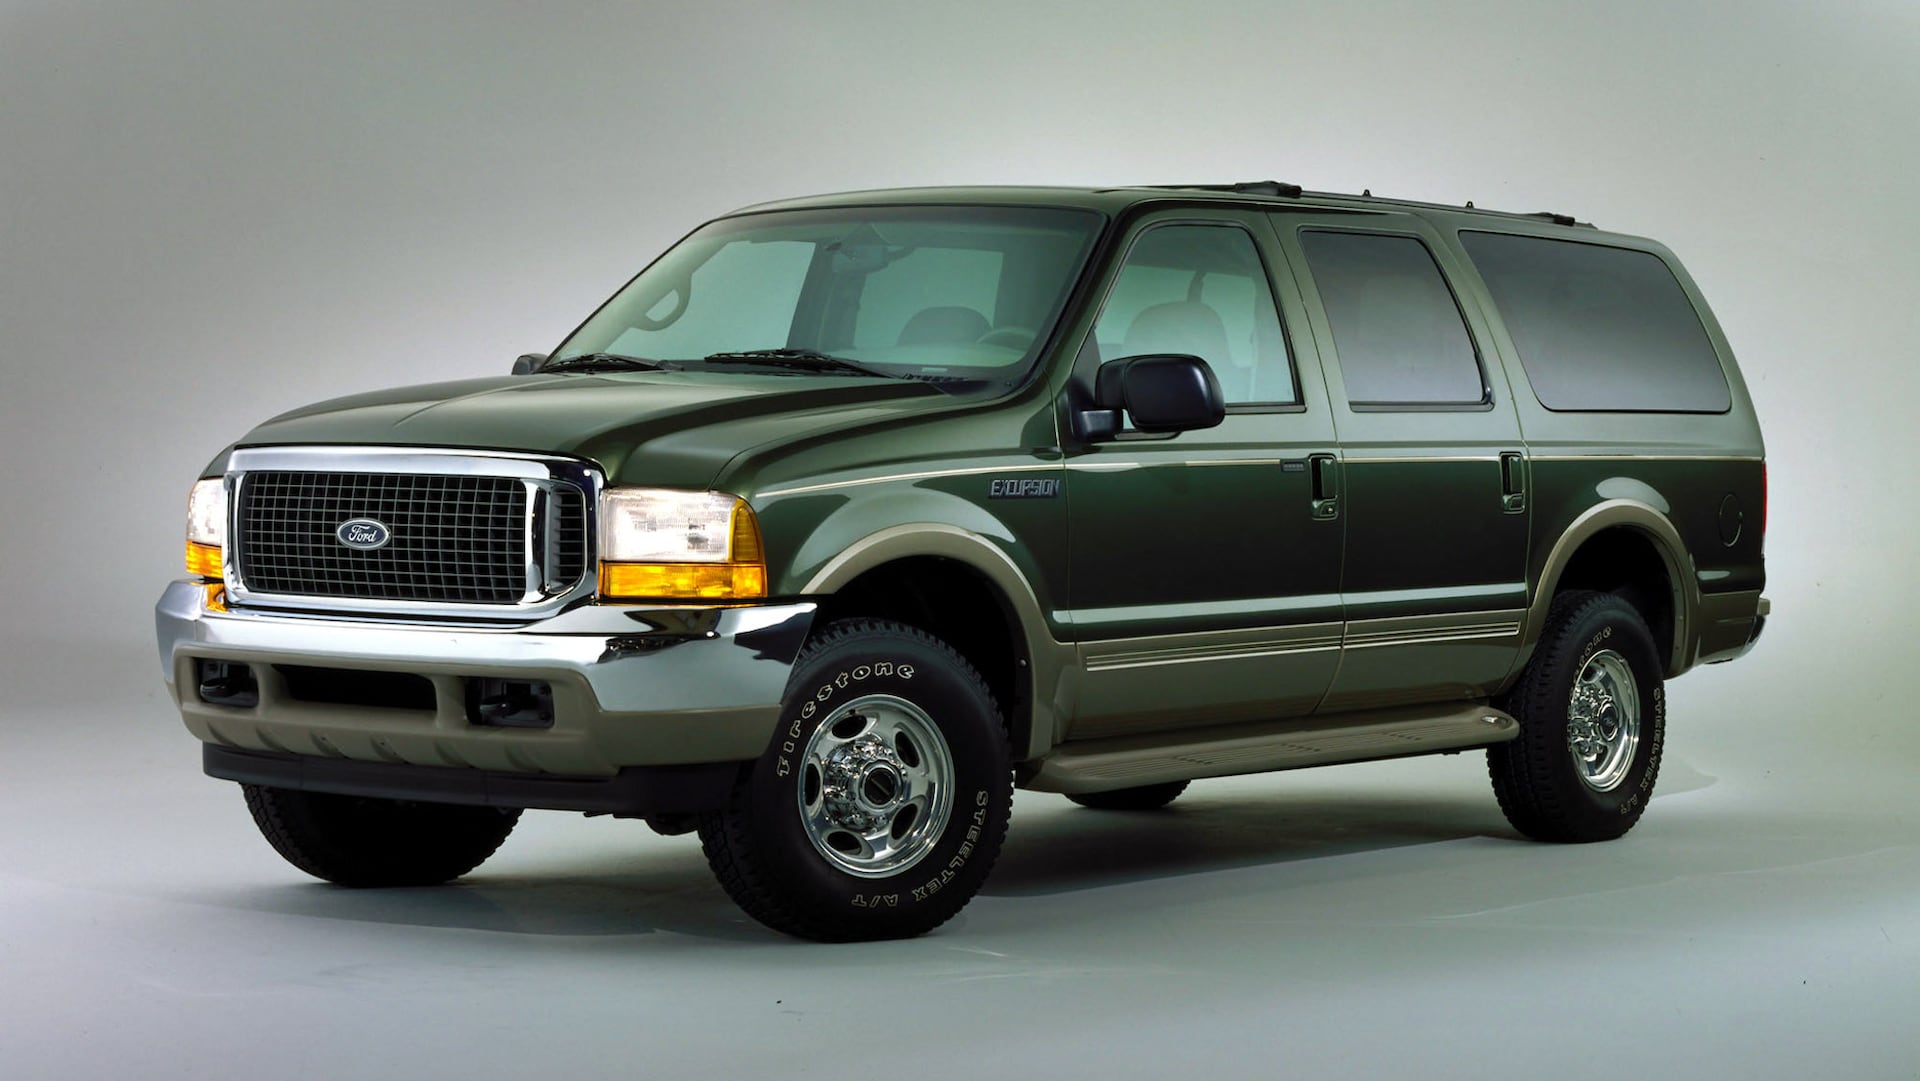 Ford Excursion Exhumed? Ford Just Applied for the Trademark